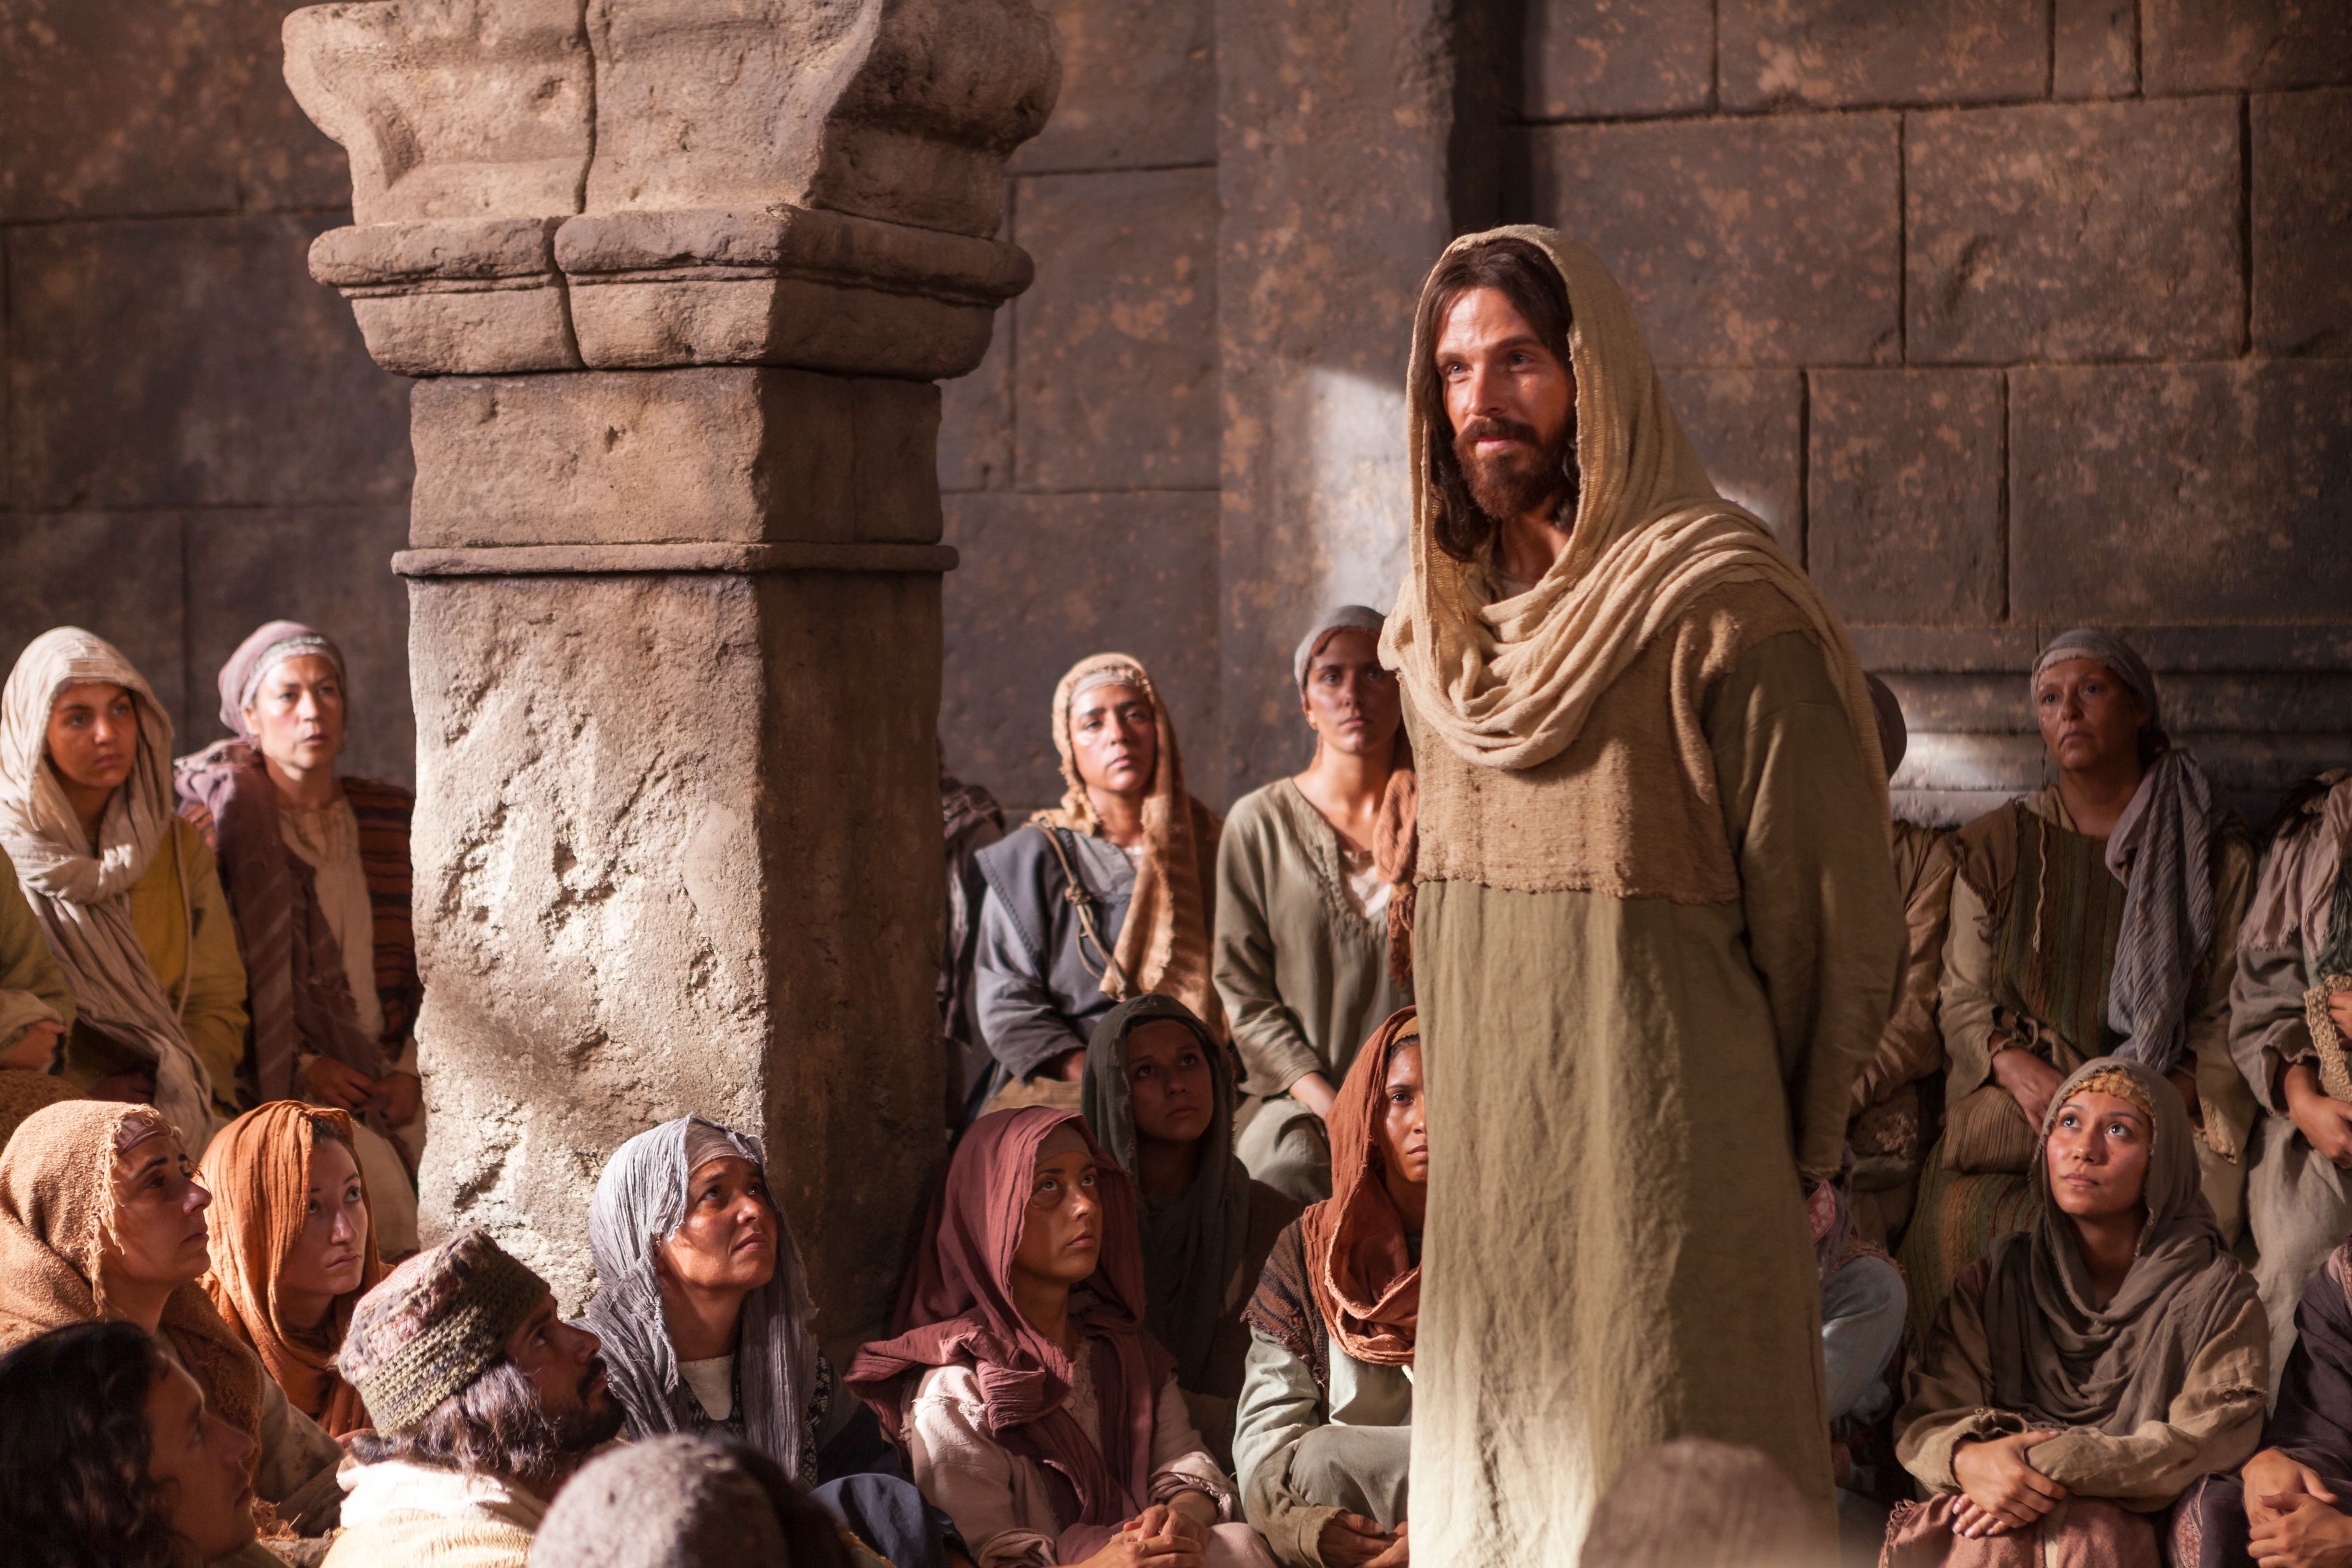 Jesus telling a group of people, “I am the bread of life.”